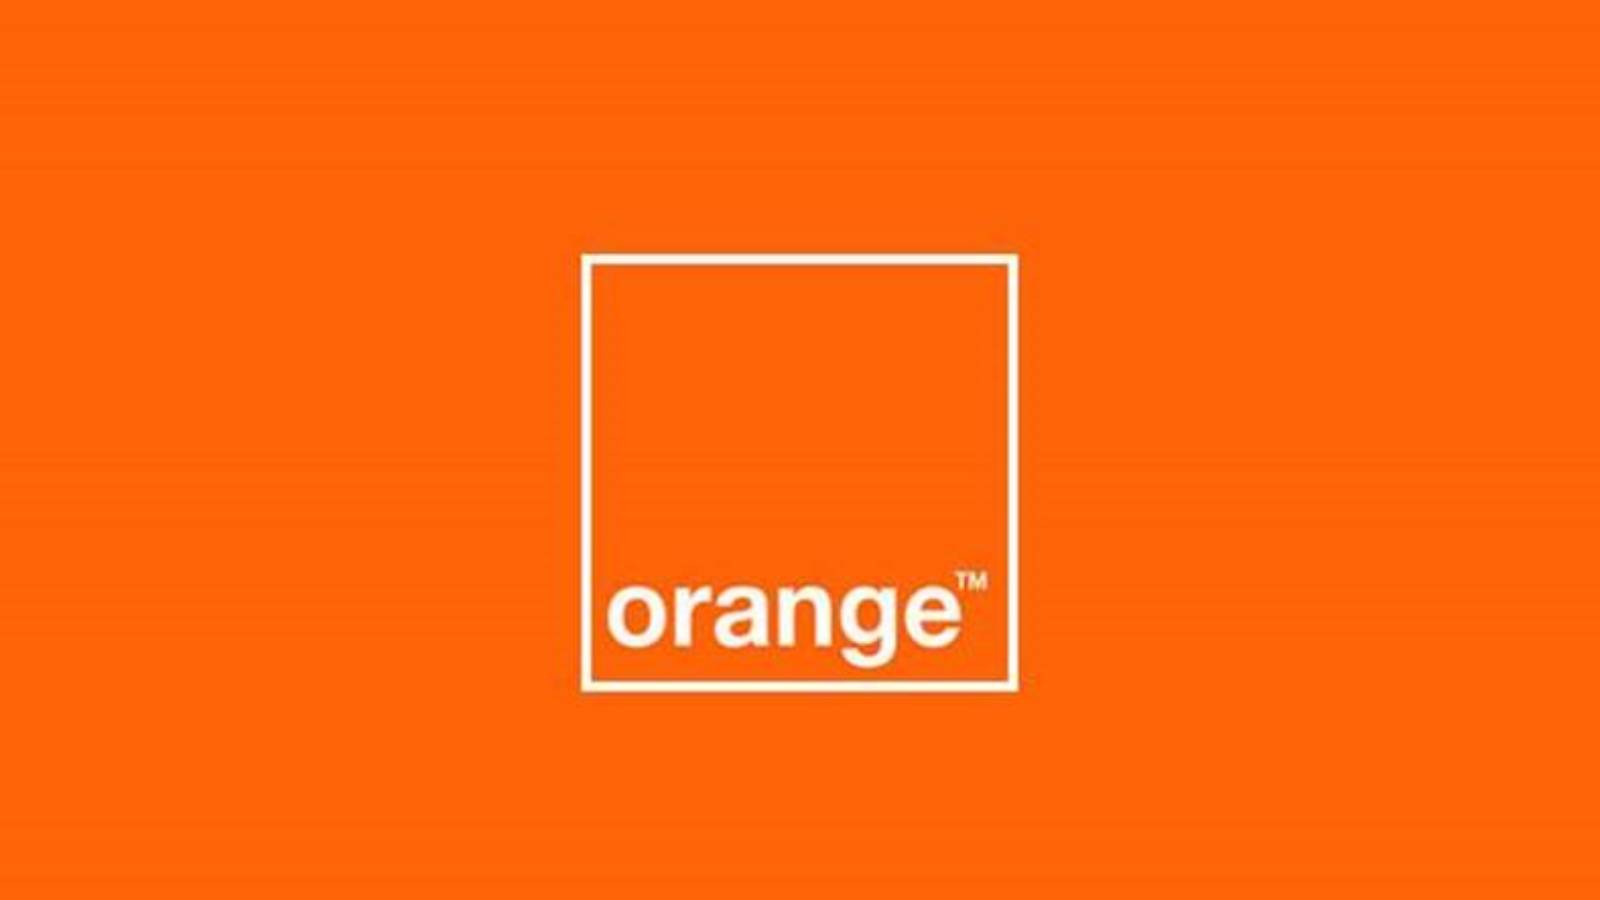 Orange Official Measure LAST MINUTE FREE for Romanian Customers